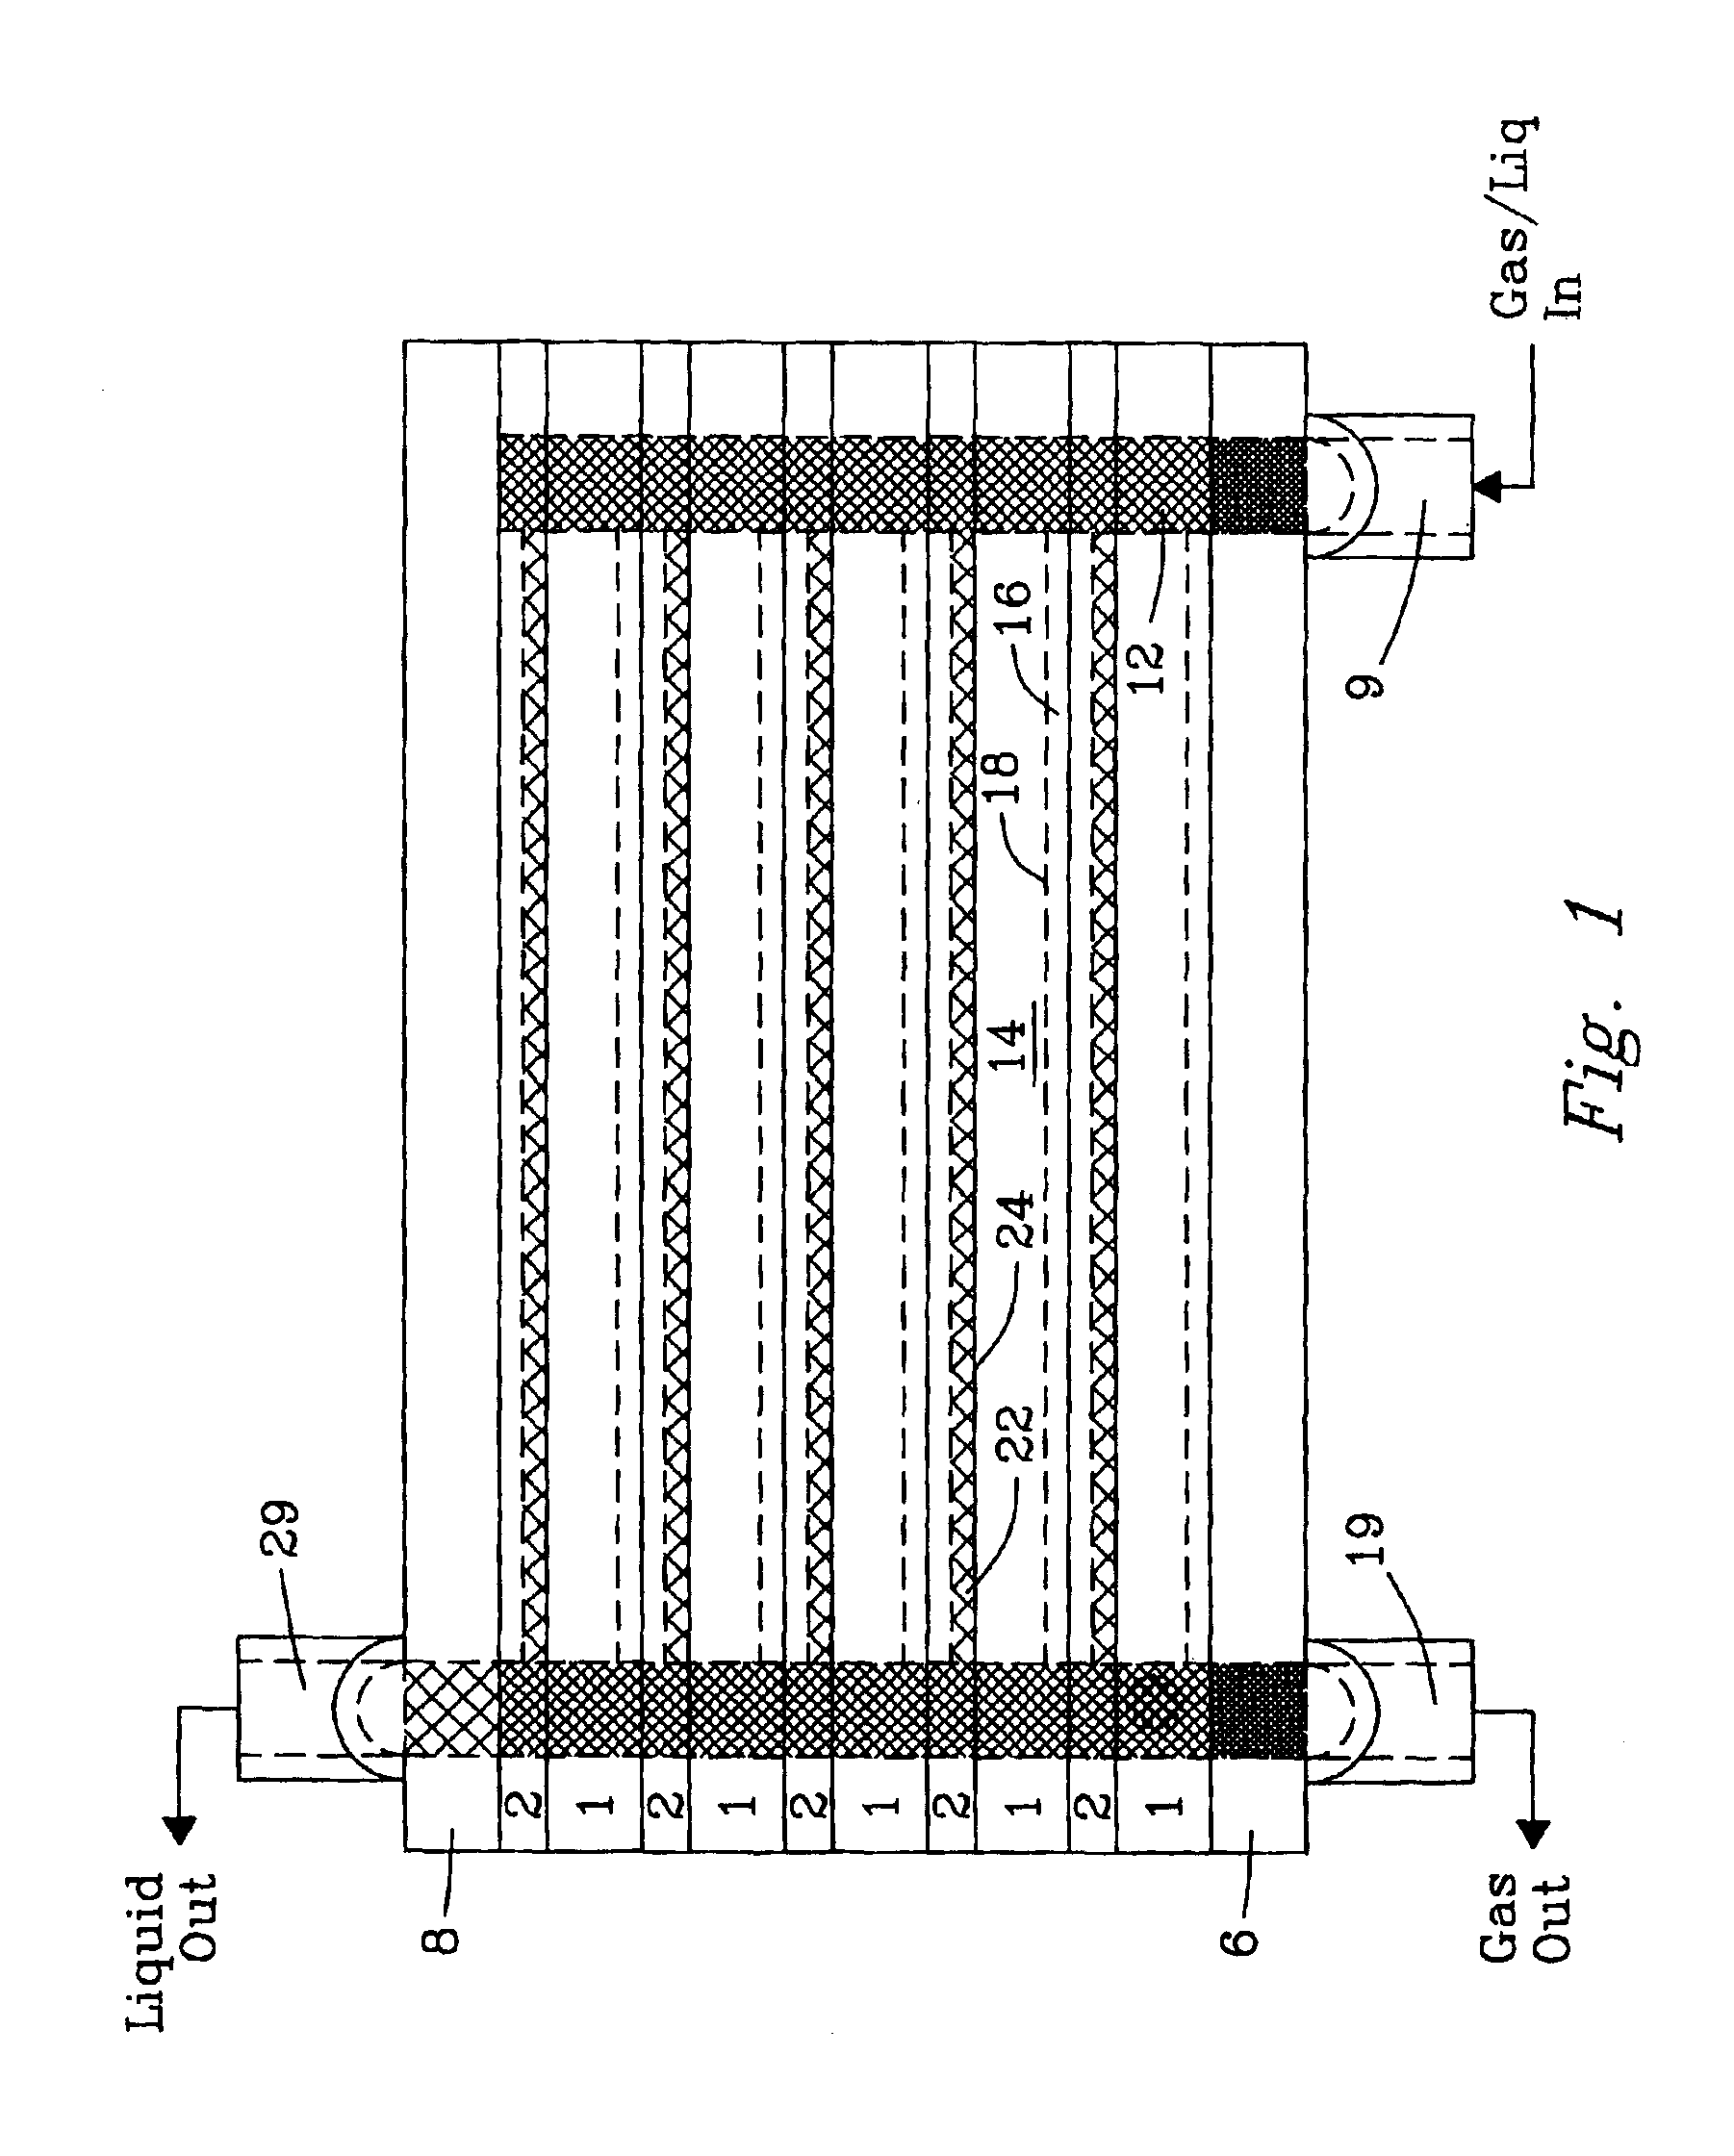 Methods of contacting substances and microsystem contactors